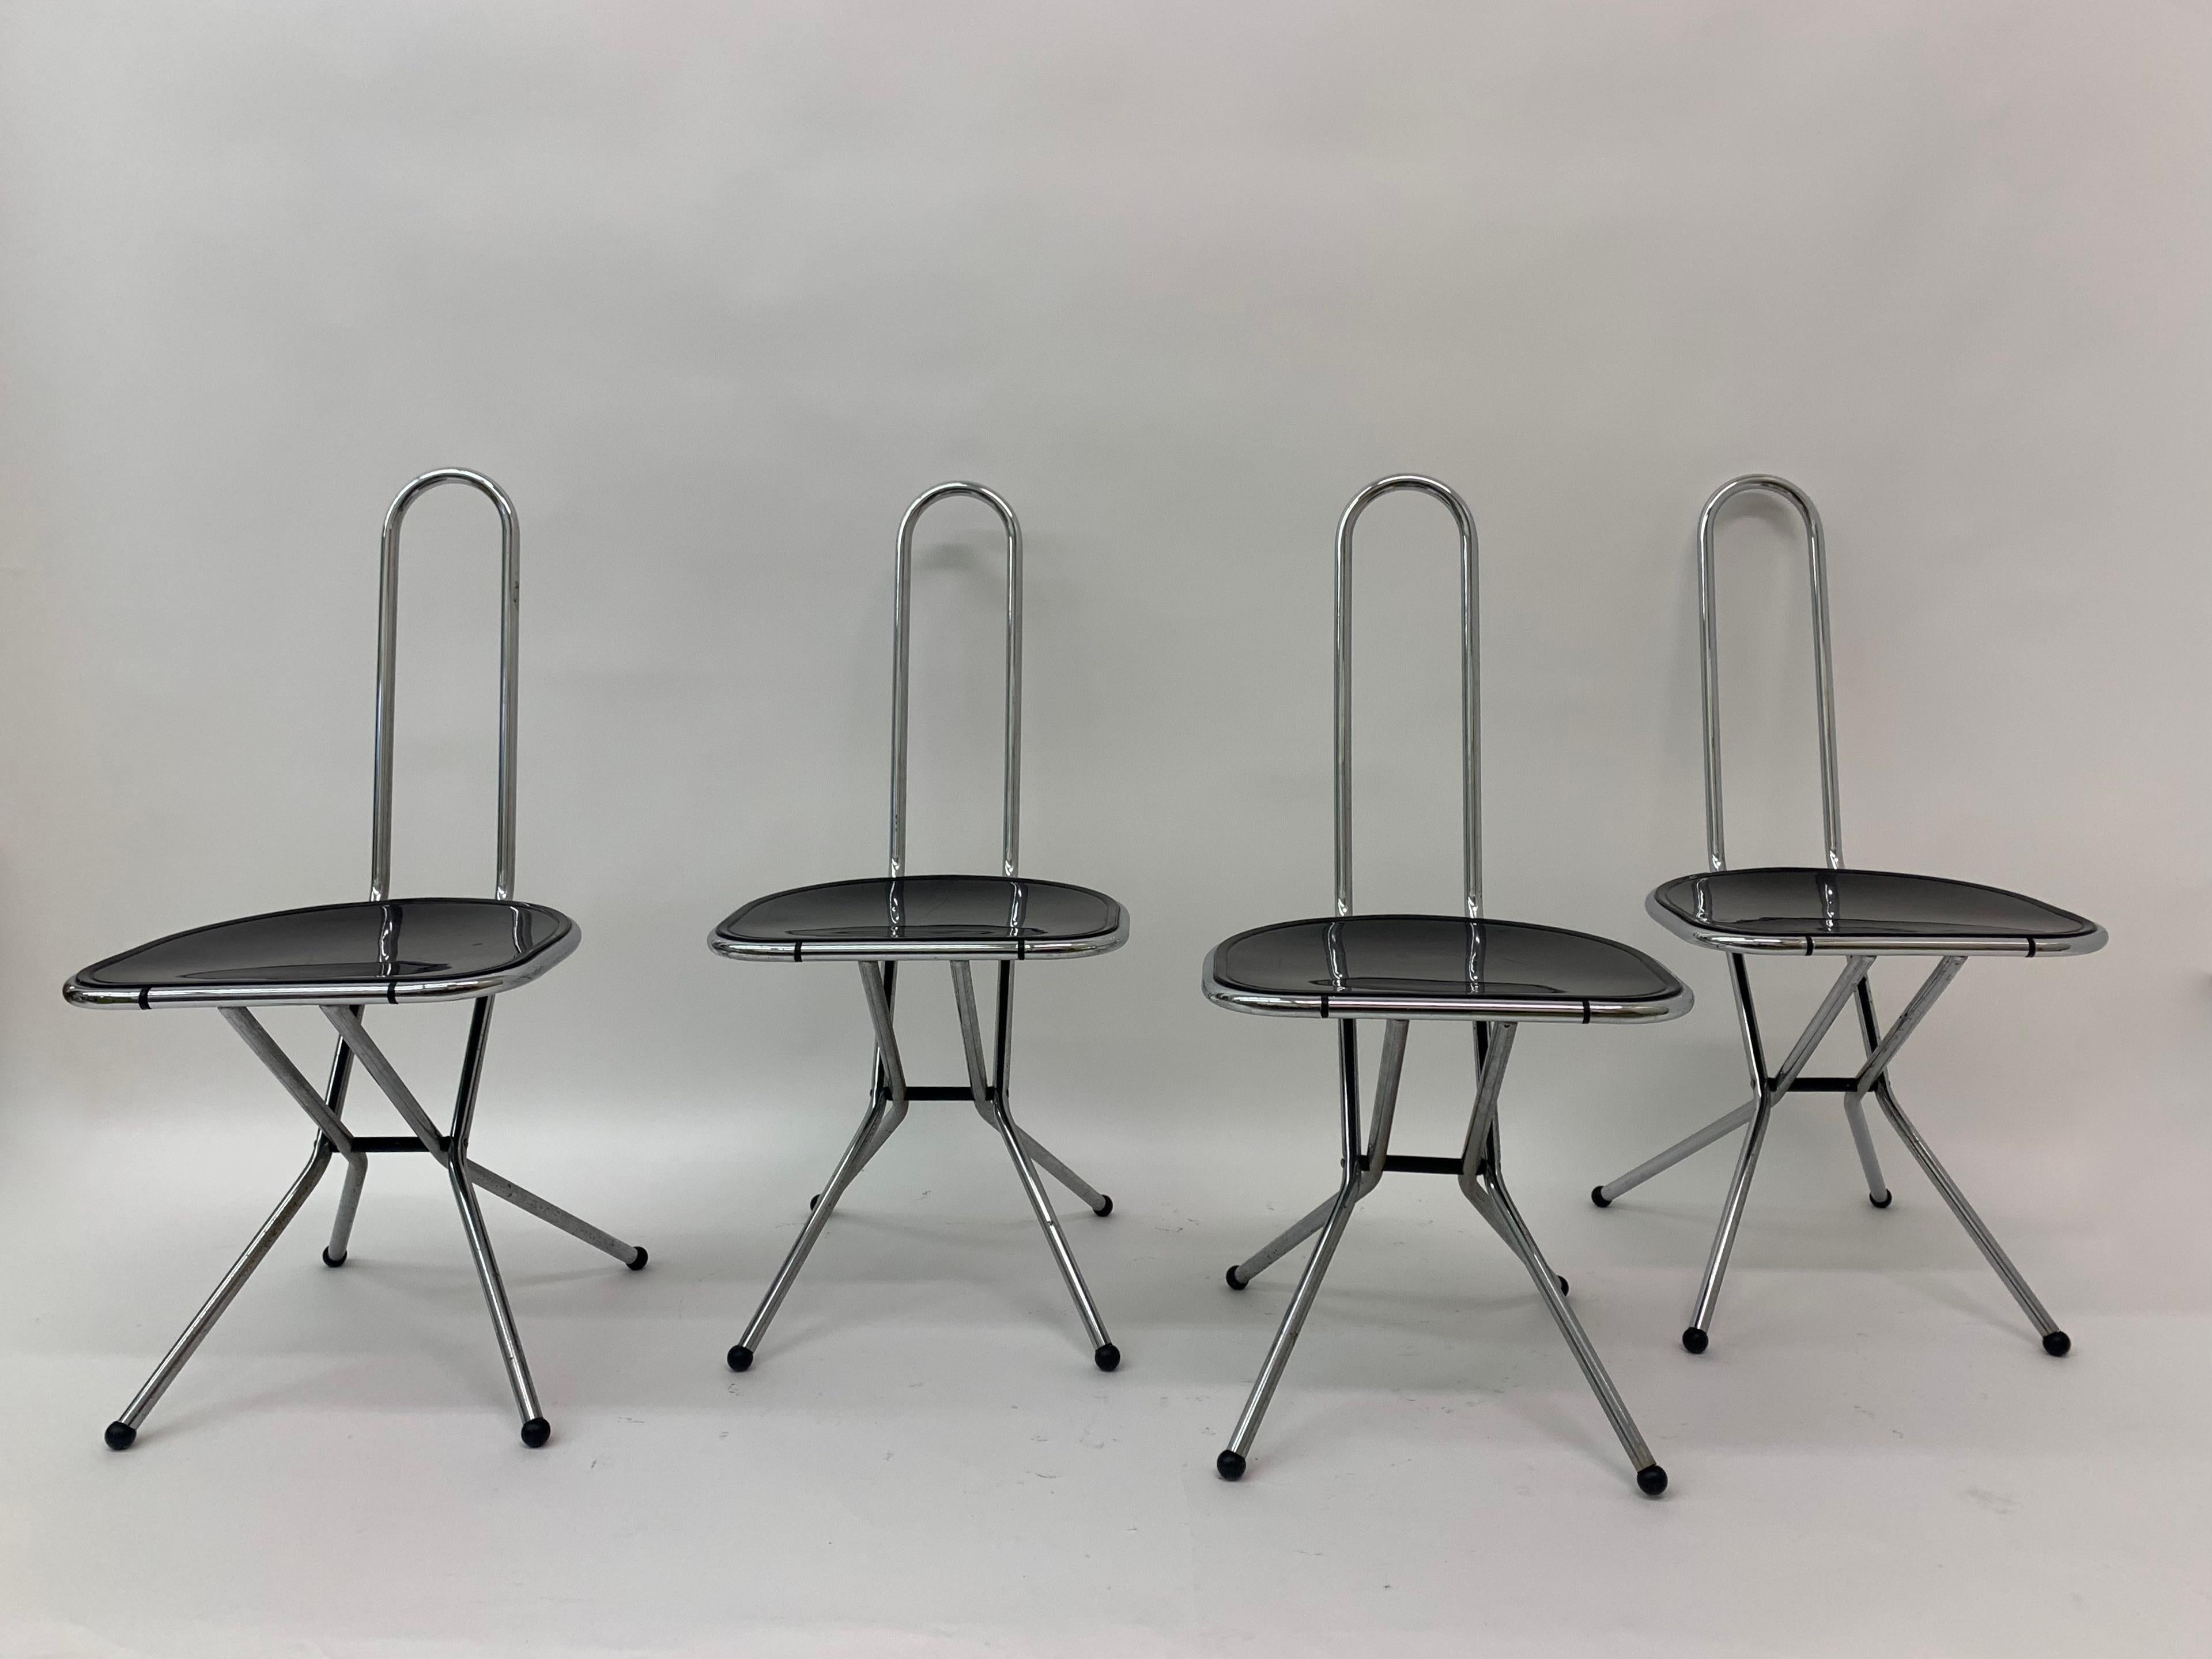 Dimensions: 40,5cmW, 45cmD, 43cm H seat, 86cm H total
Period: 1980’s
Condition: Good , Metal has corrosion and seats have scratches from use.
Material: Metal , plastic